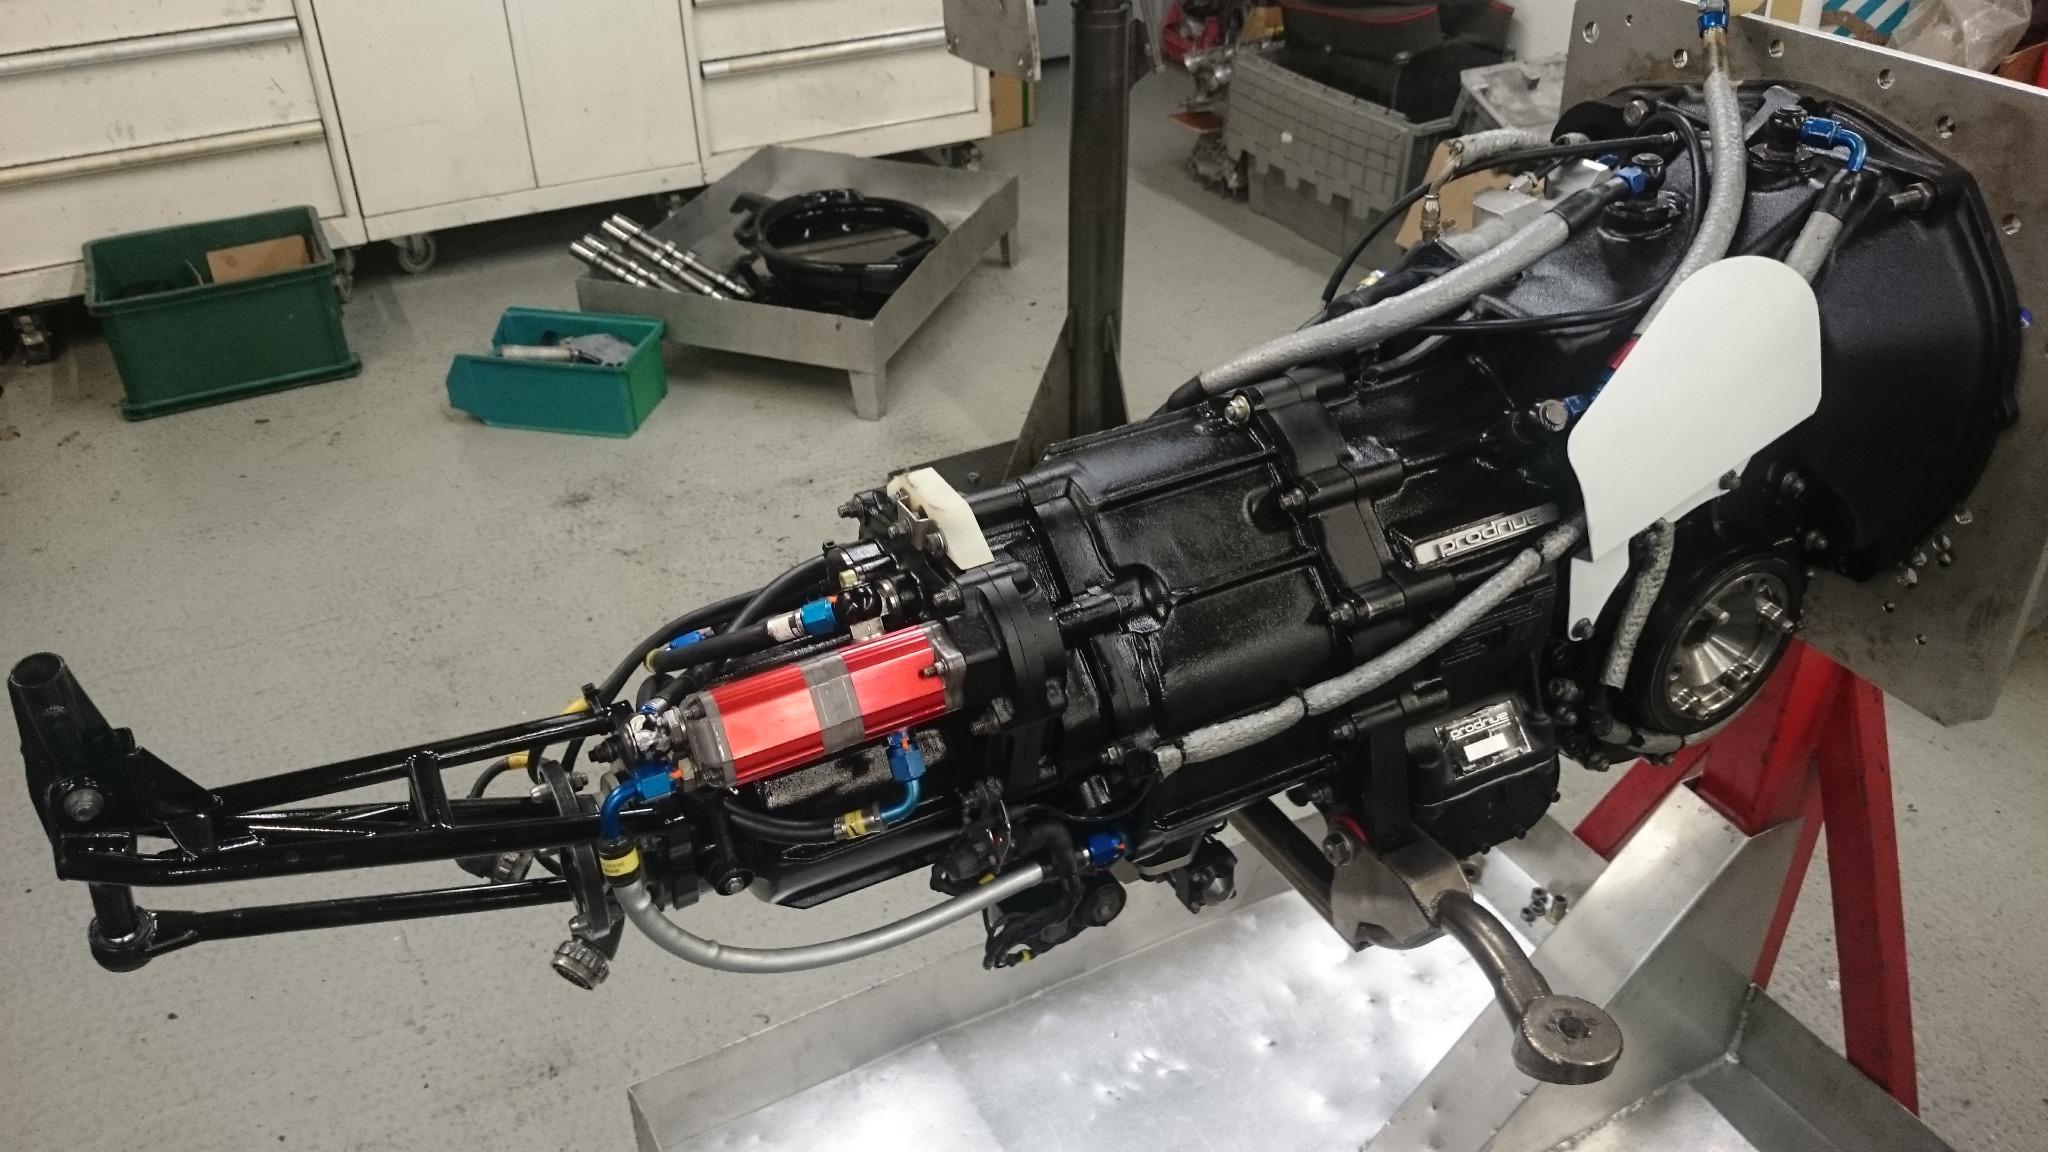 Autosportif Eng. Ltd no Twitter: "A completed S8 Impreza WRC gearbox  rebuild ready for the customer to collect #Subaru http://t.co/YuJzU19sm5" /  Twitter